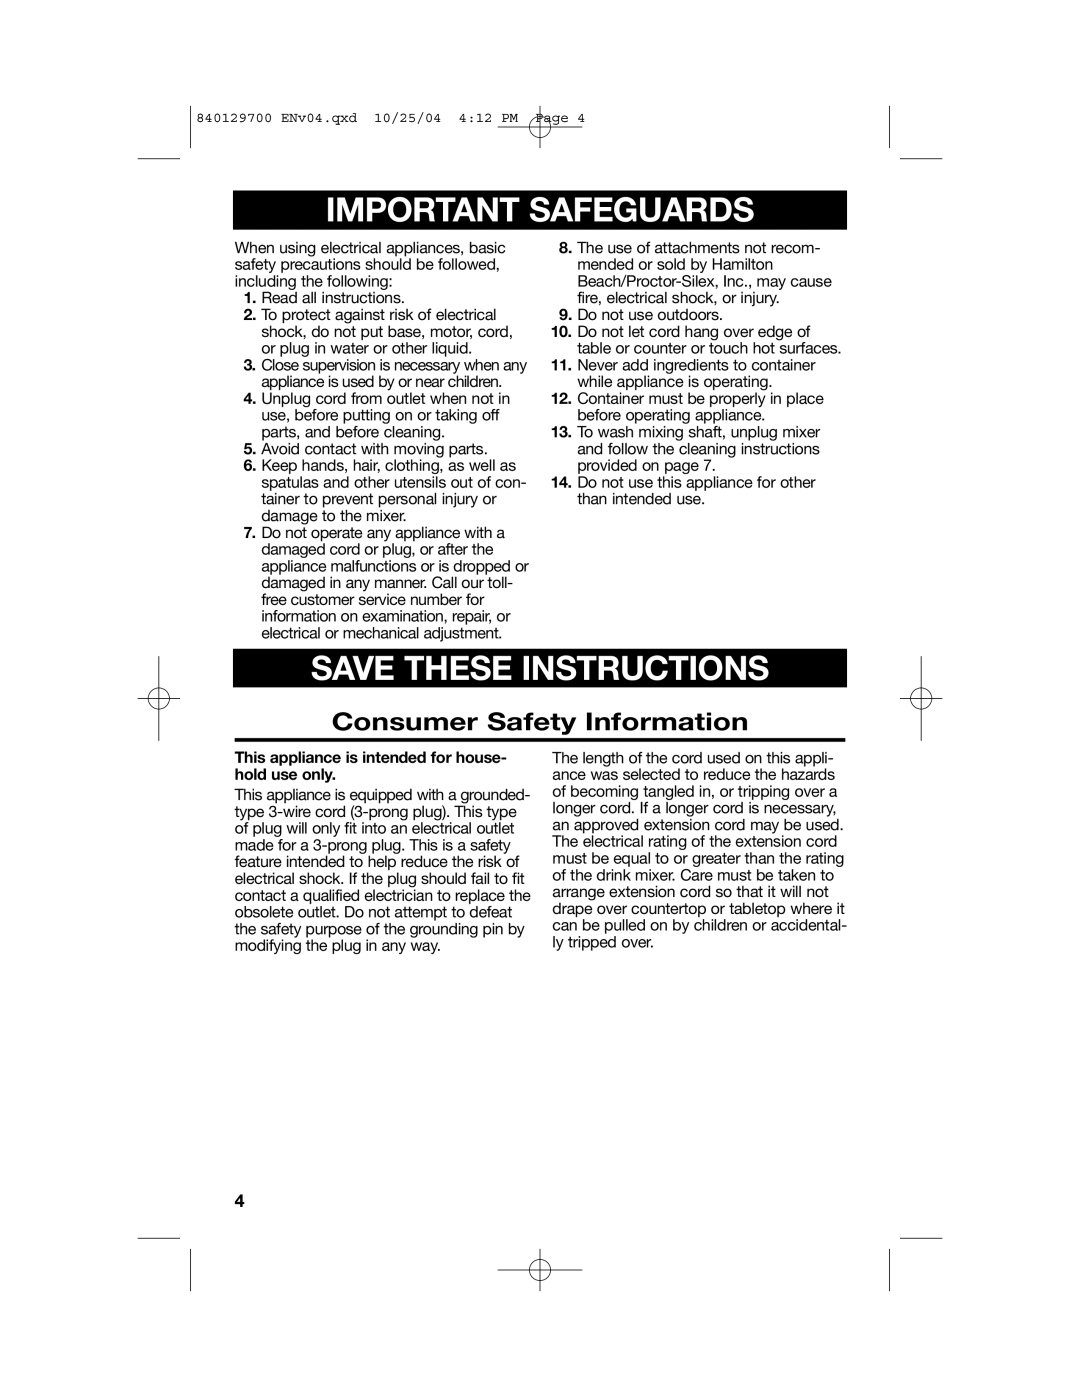 Hamilton Beach Drink Mixer manual Consumer Safety Information, Important Safeguards, Save These Instructions 